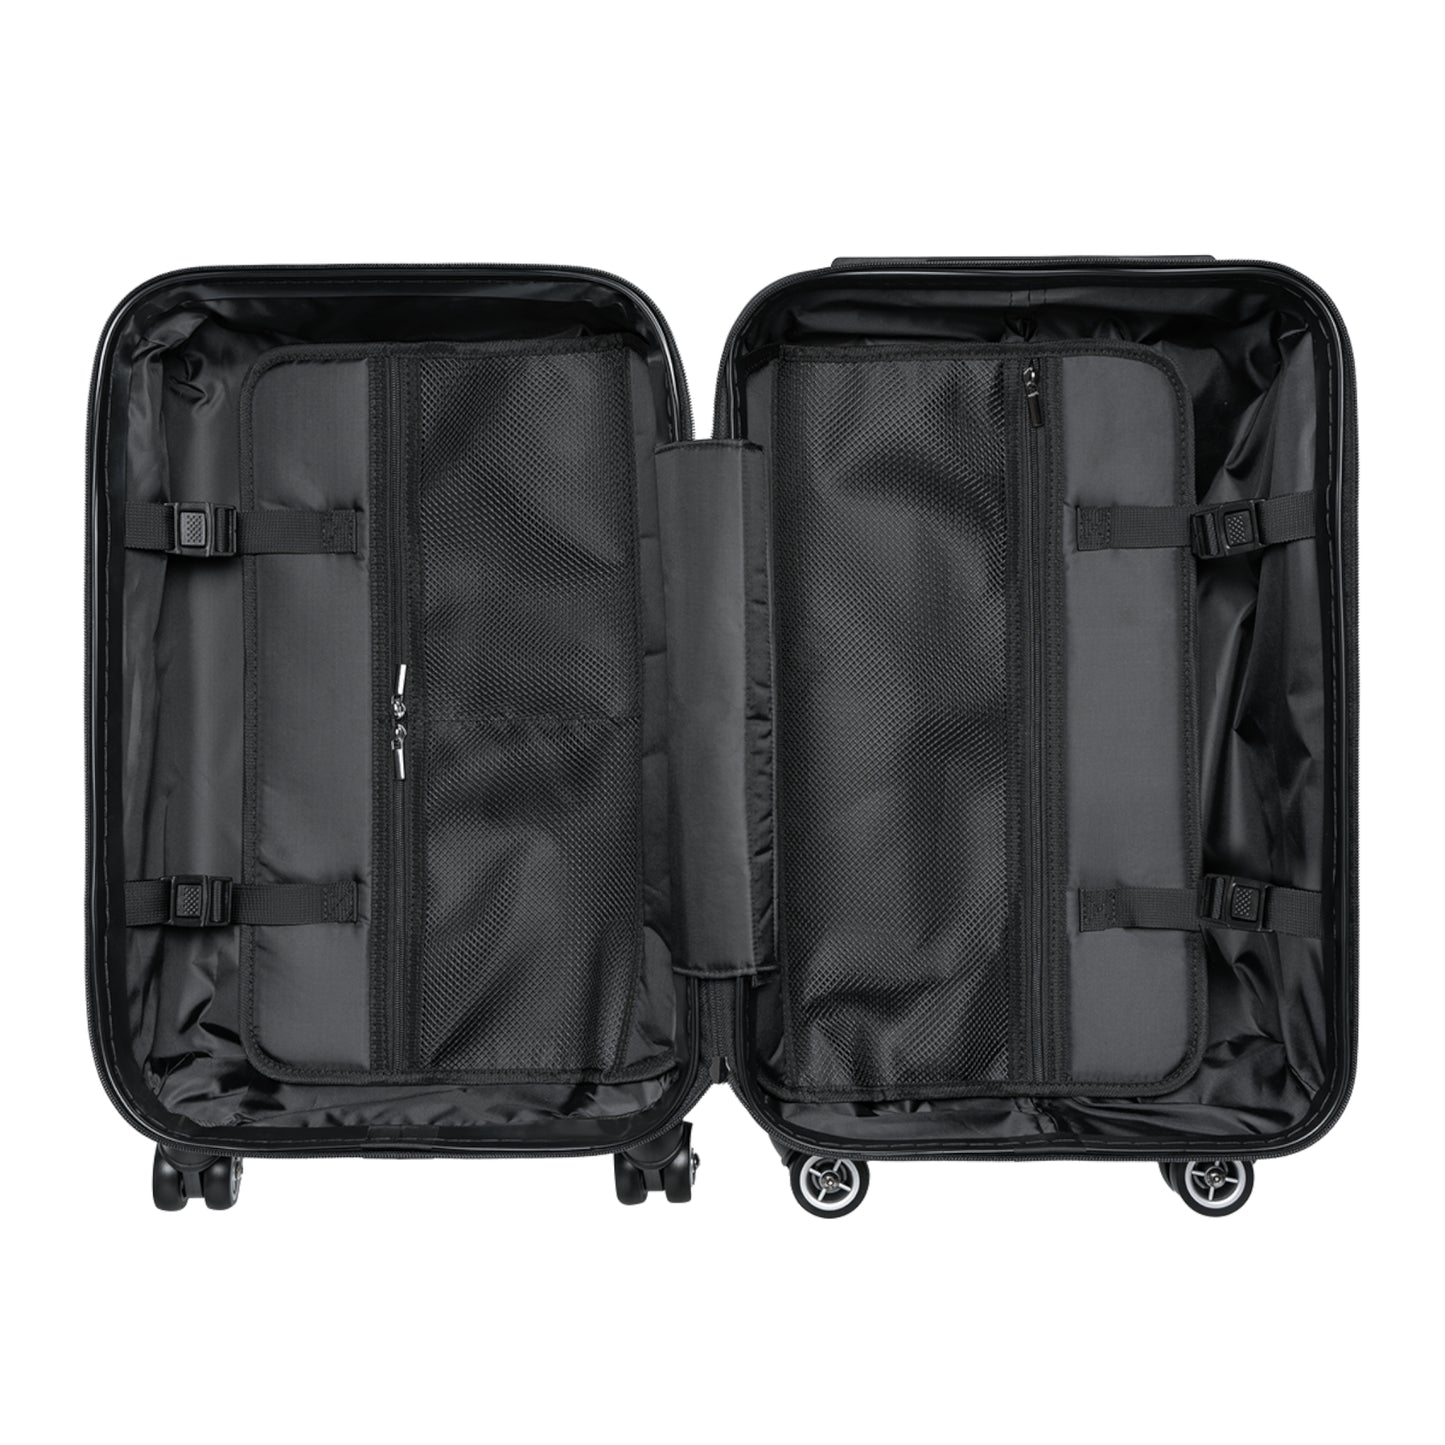 "Babe" Carry on Suitcase plus 2 more sizes Luggage